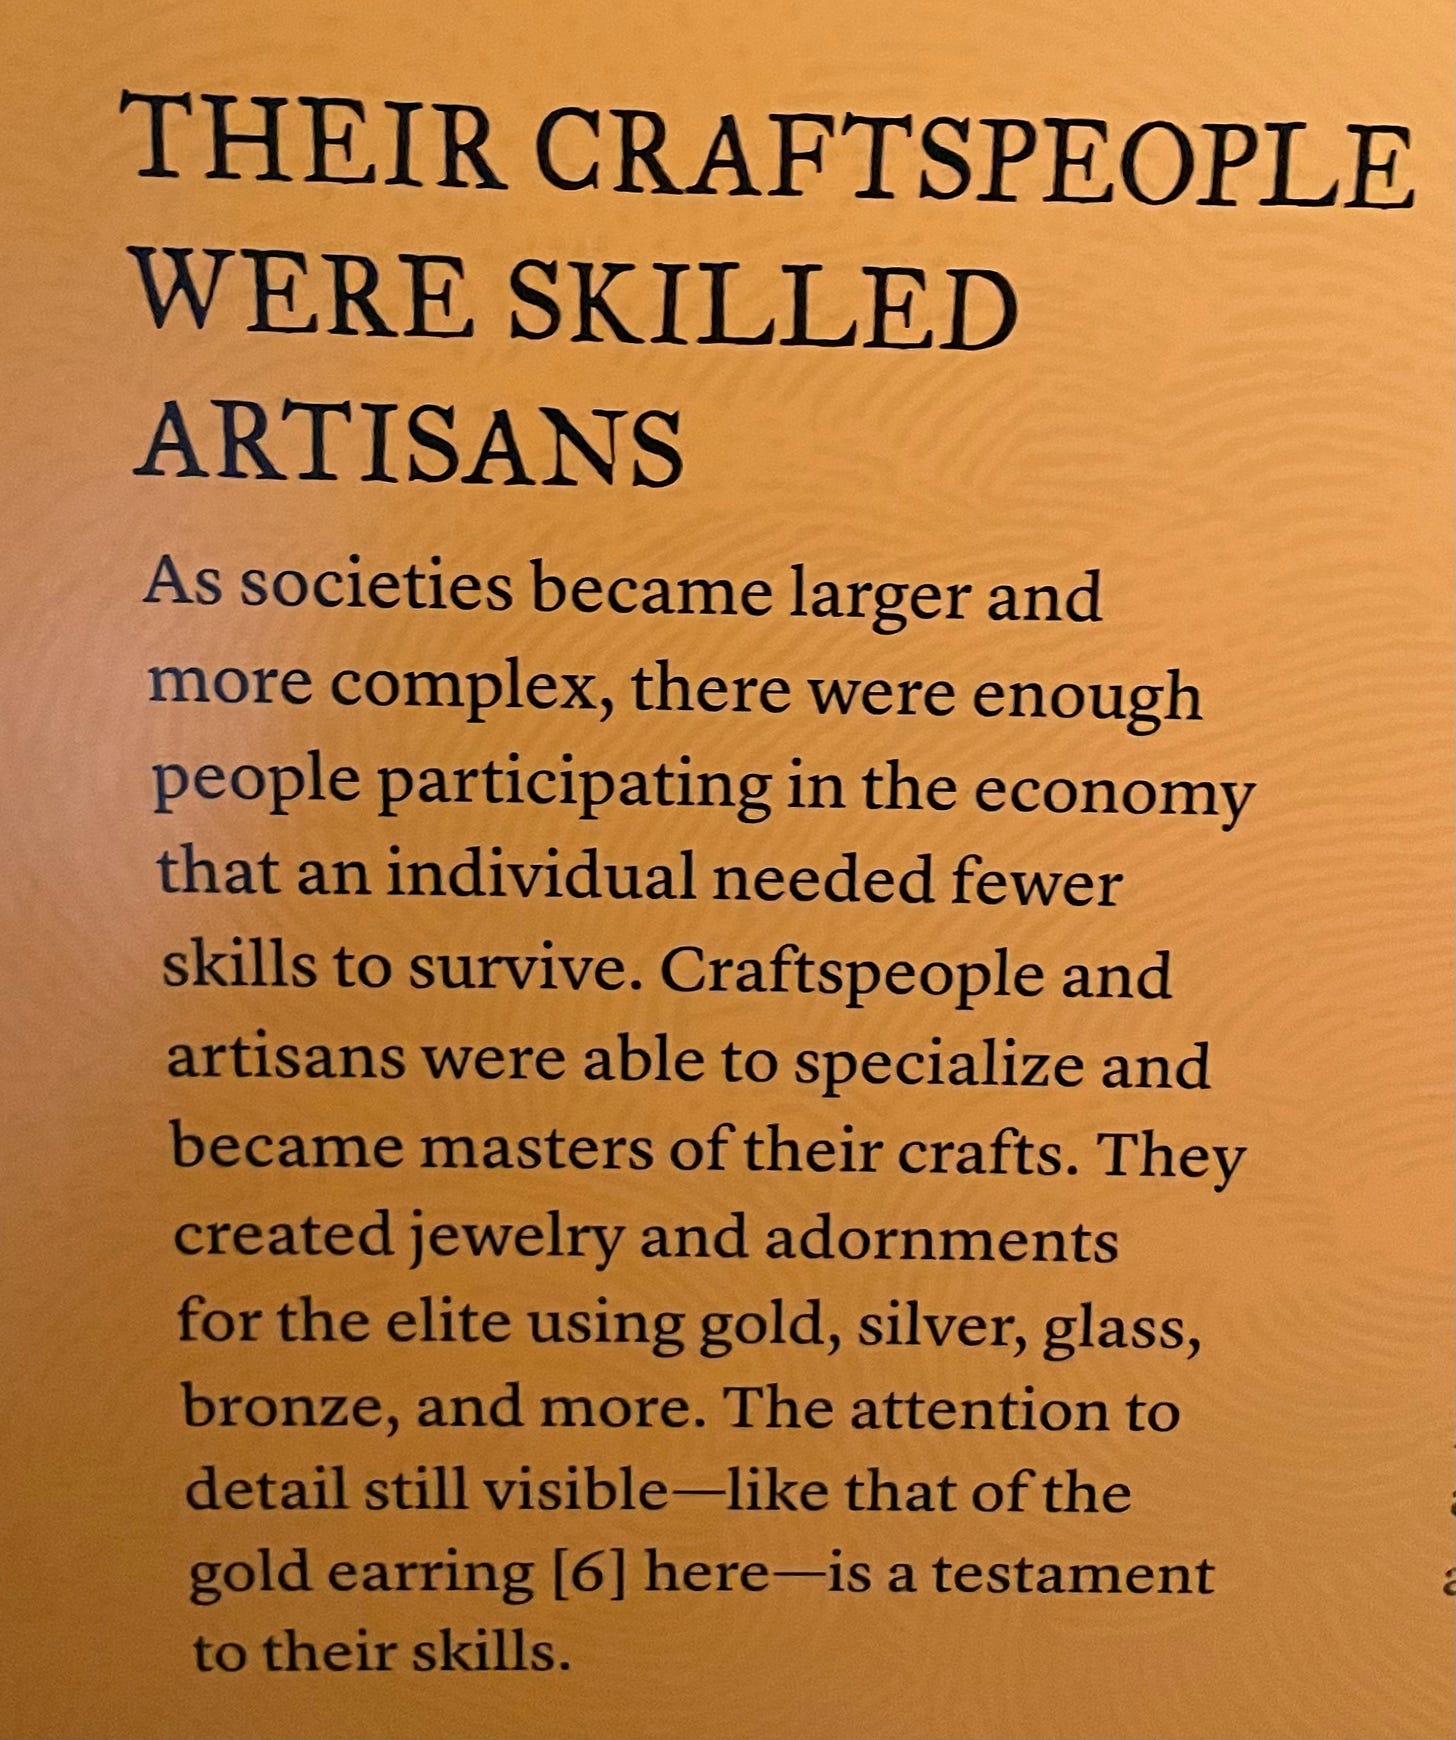 museum plaque reading 'their craftspeople were skilled artisans. As societies became larger and more complex, there were enough people participating in the economy that an individual needed fewer skills to survive. Craftspeople and artisans were able to specialize and became masters of their crafts. They created jewelry and adornments for the elite using gold, silver, glass, bronzes, and more.